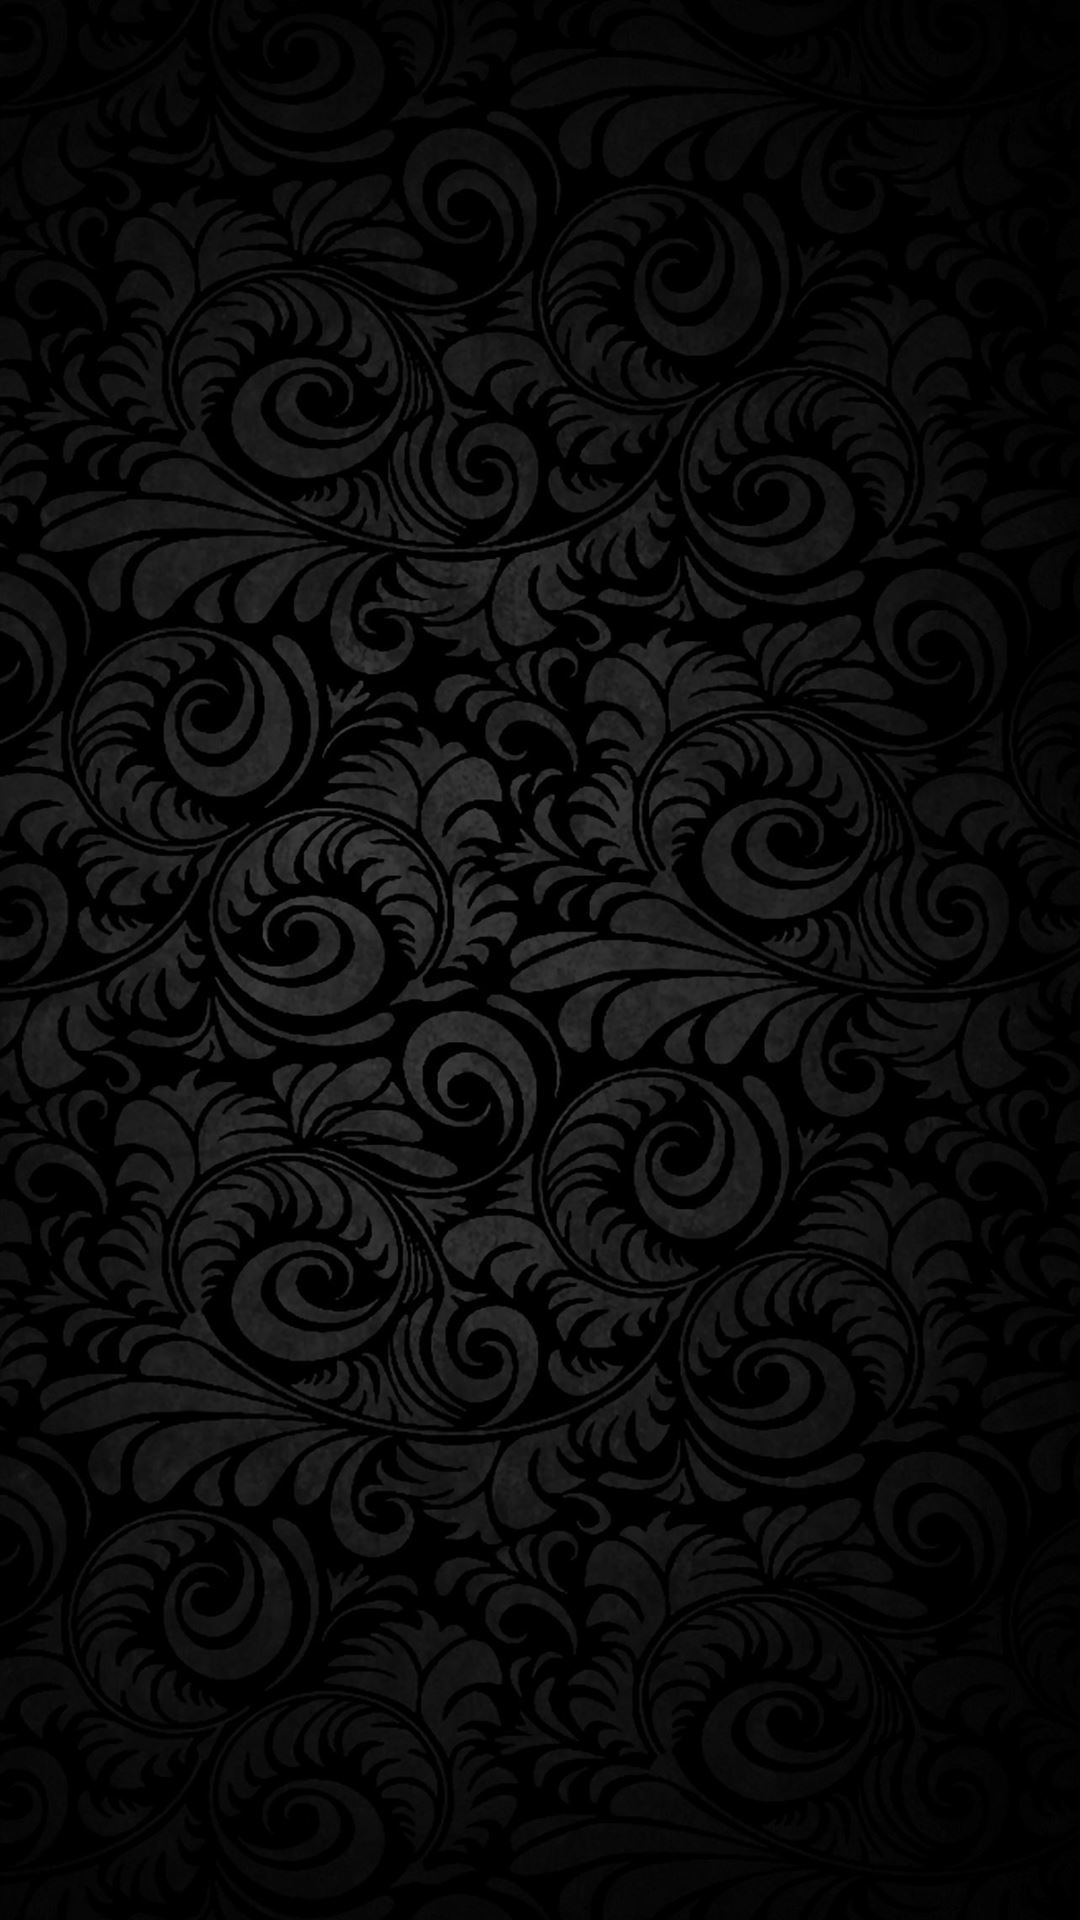 Dark patterned background iphone wallpapers free download